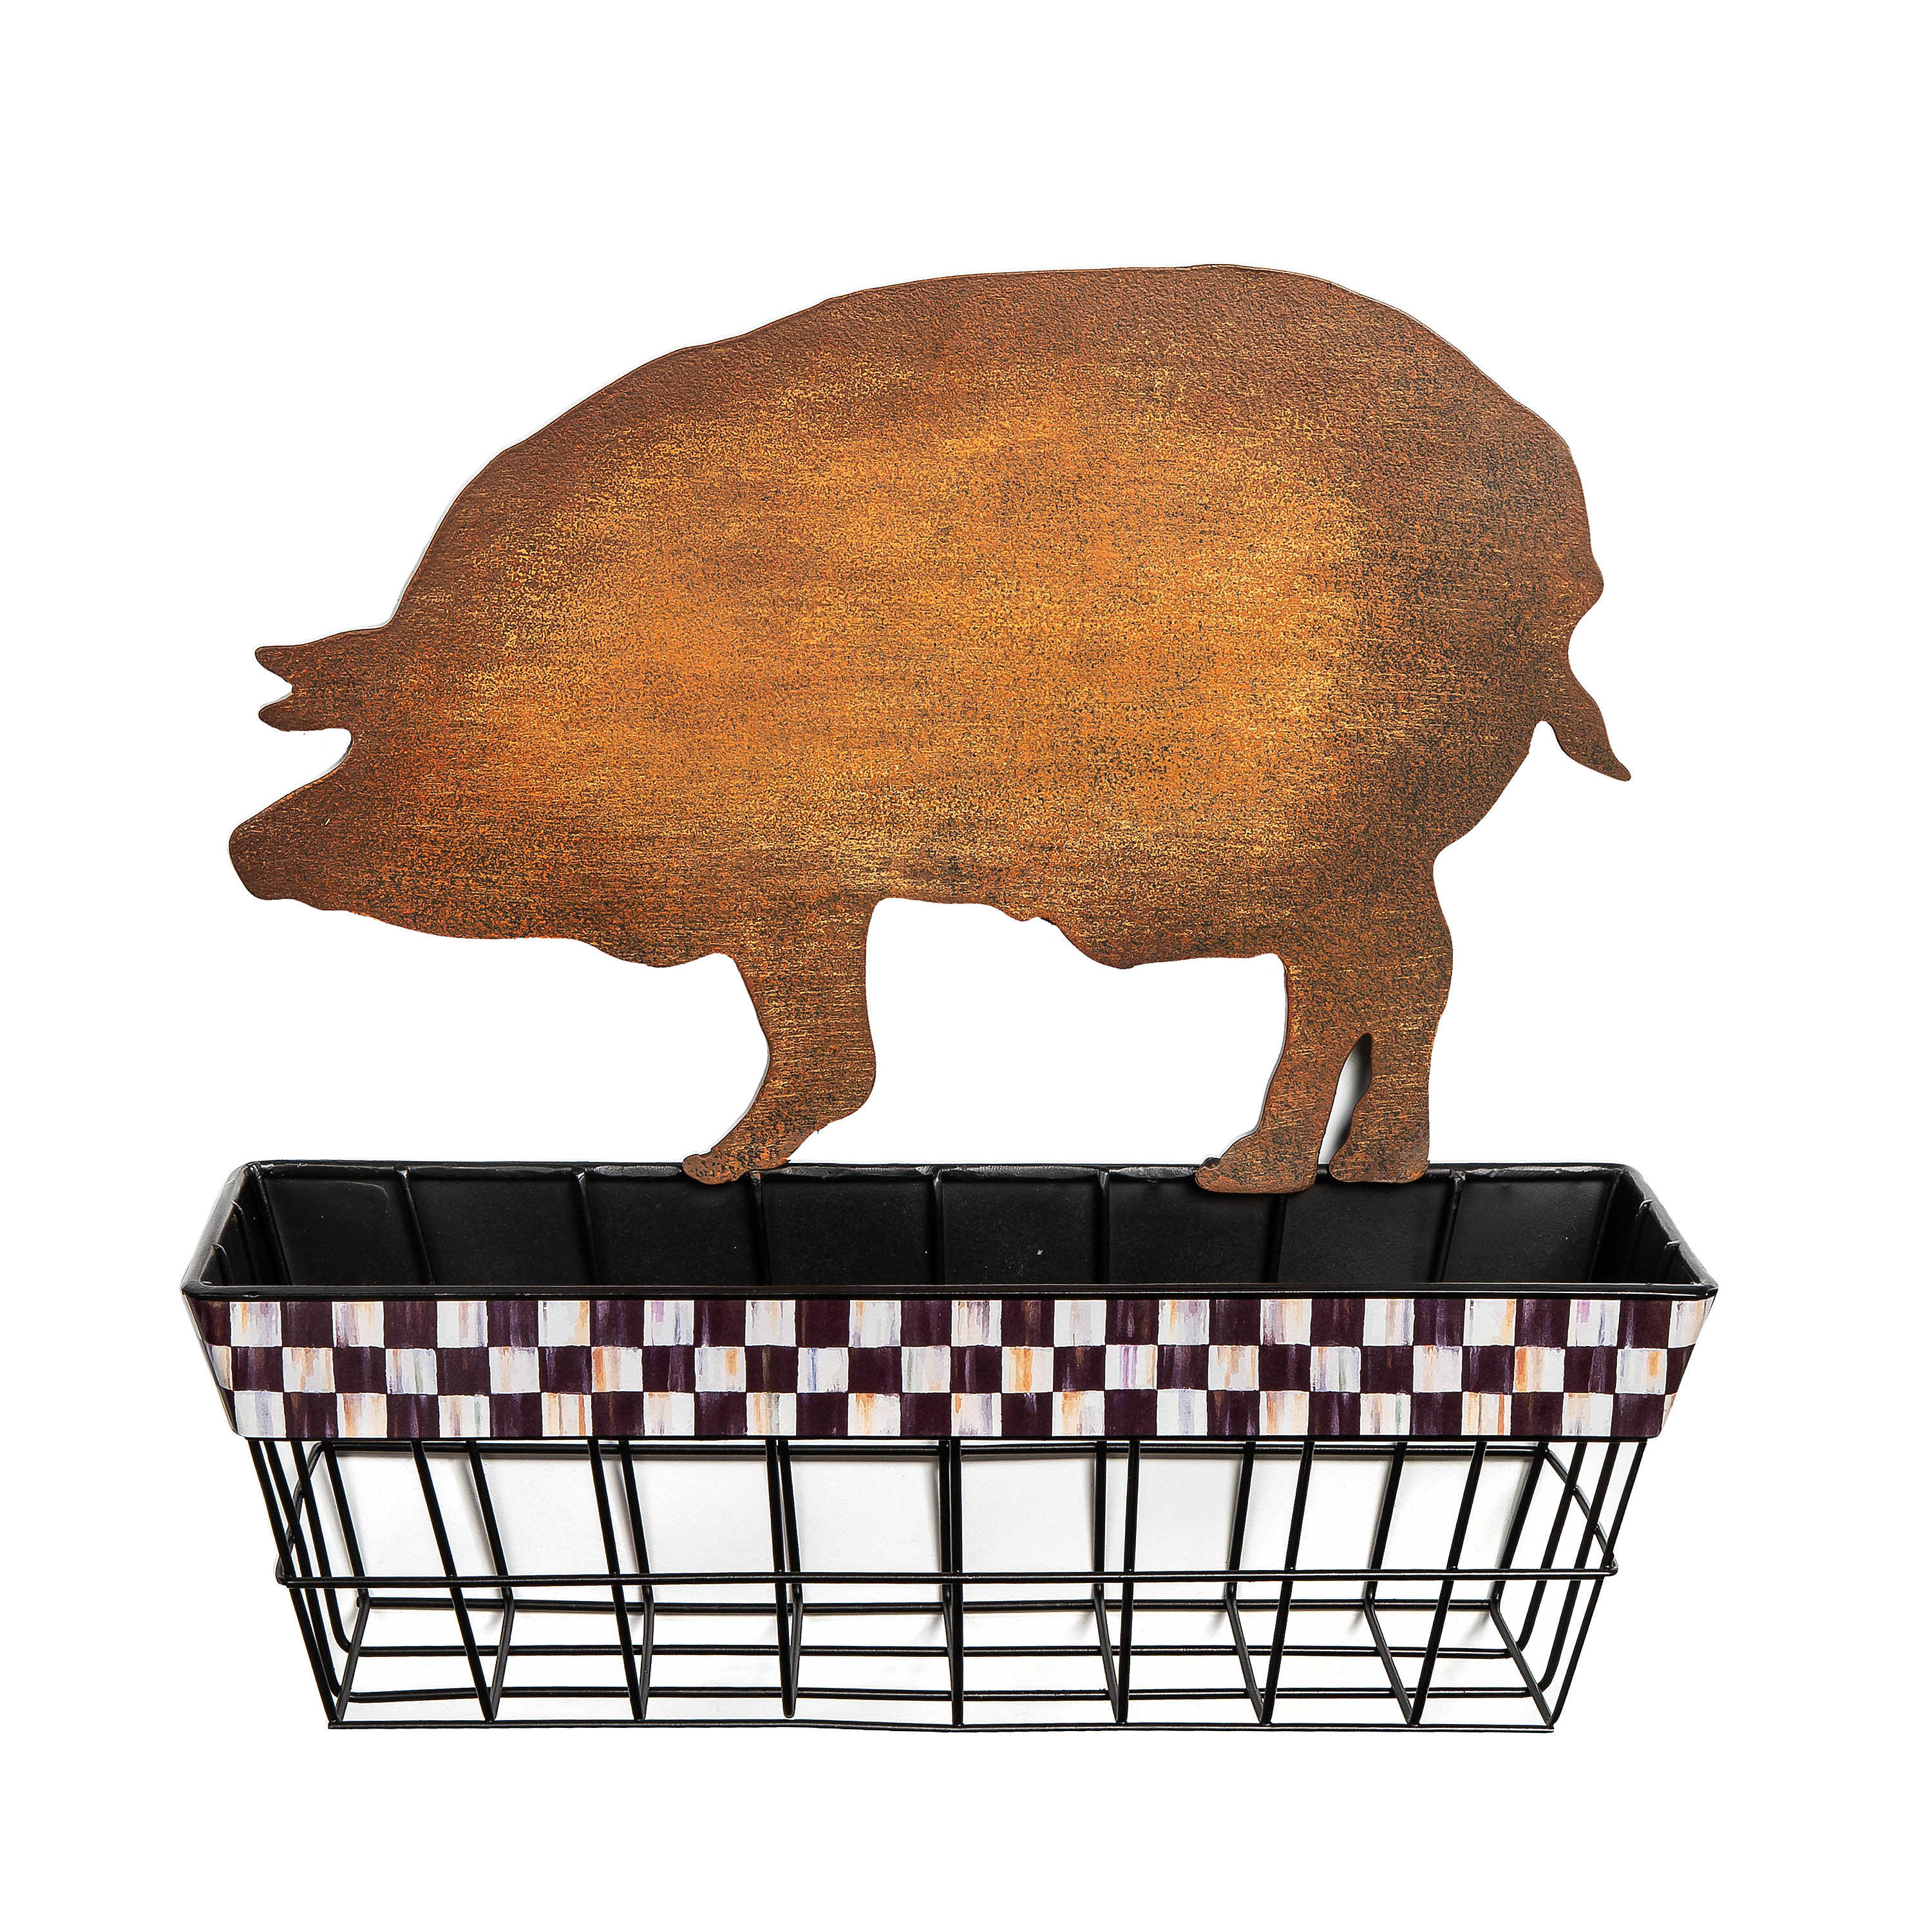 Courtly Check Pig Wall Basket mackenzie-childs Panama 0